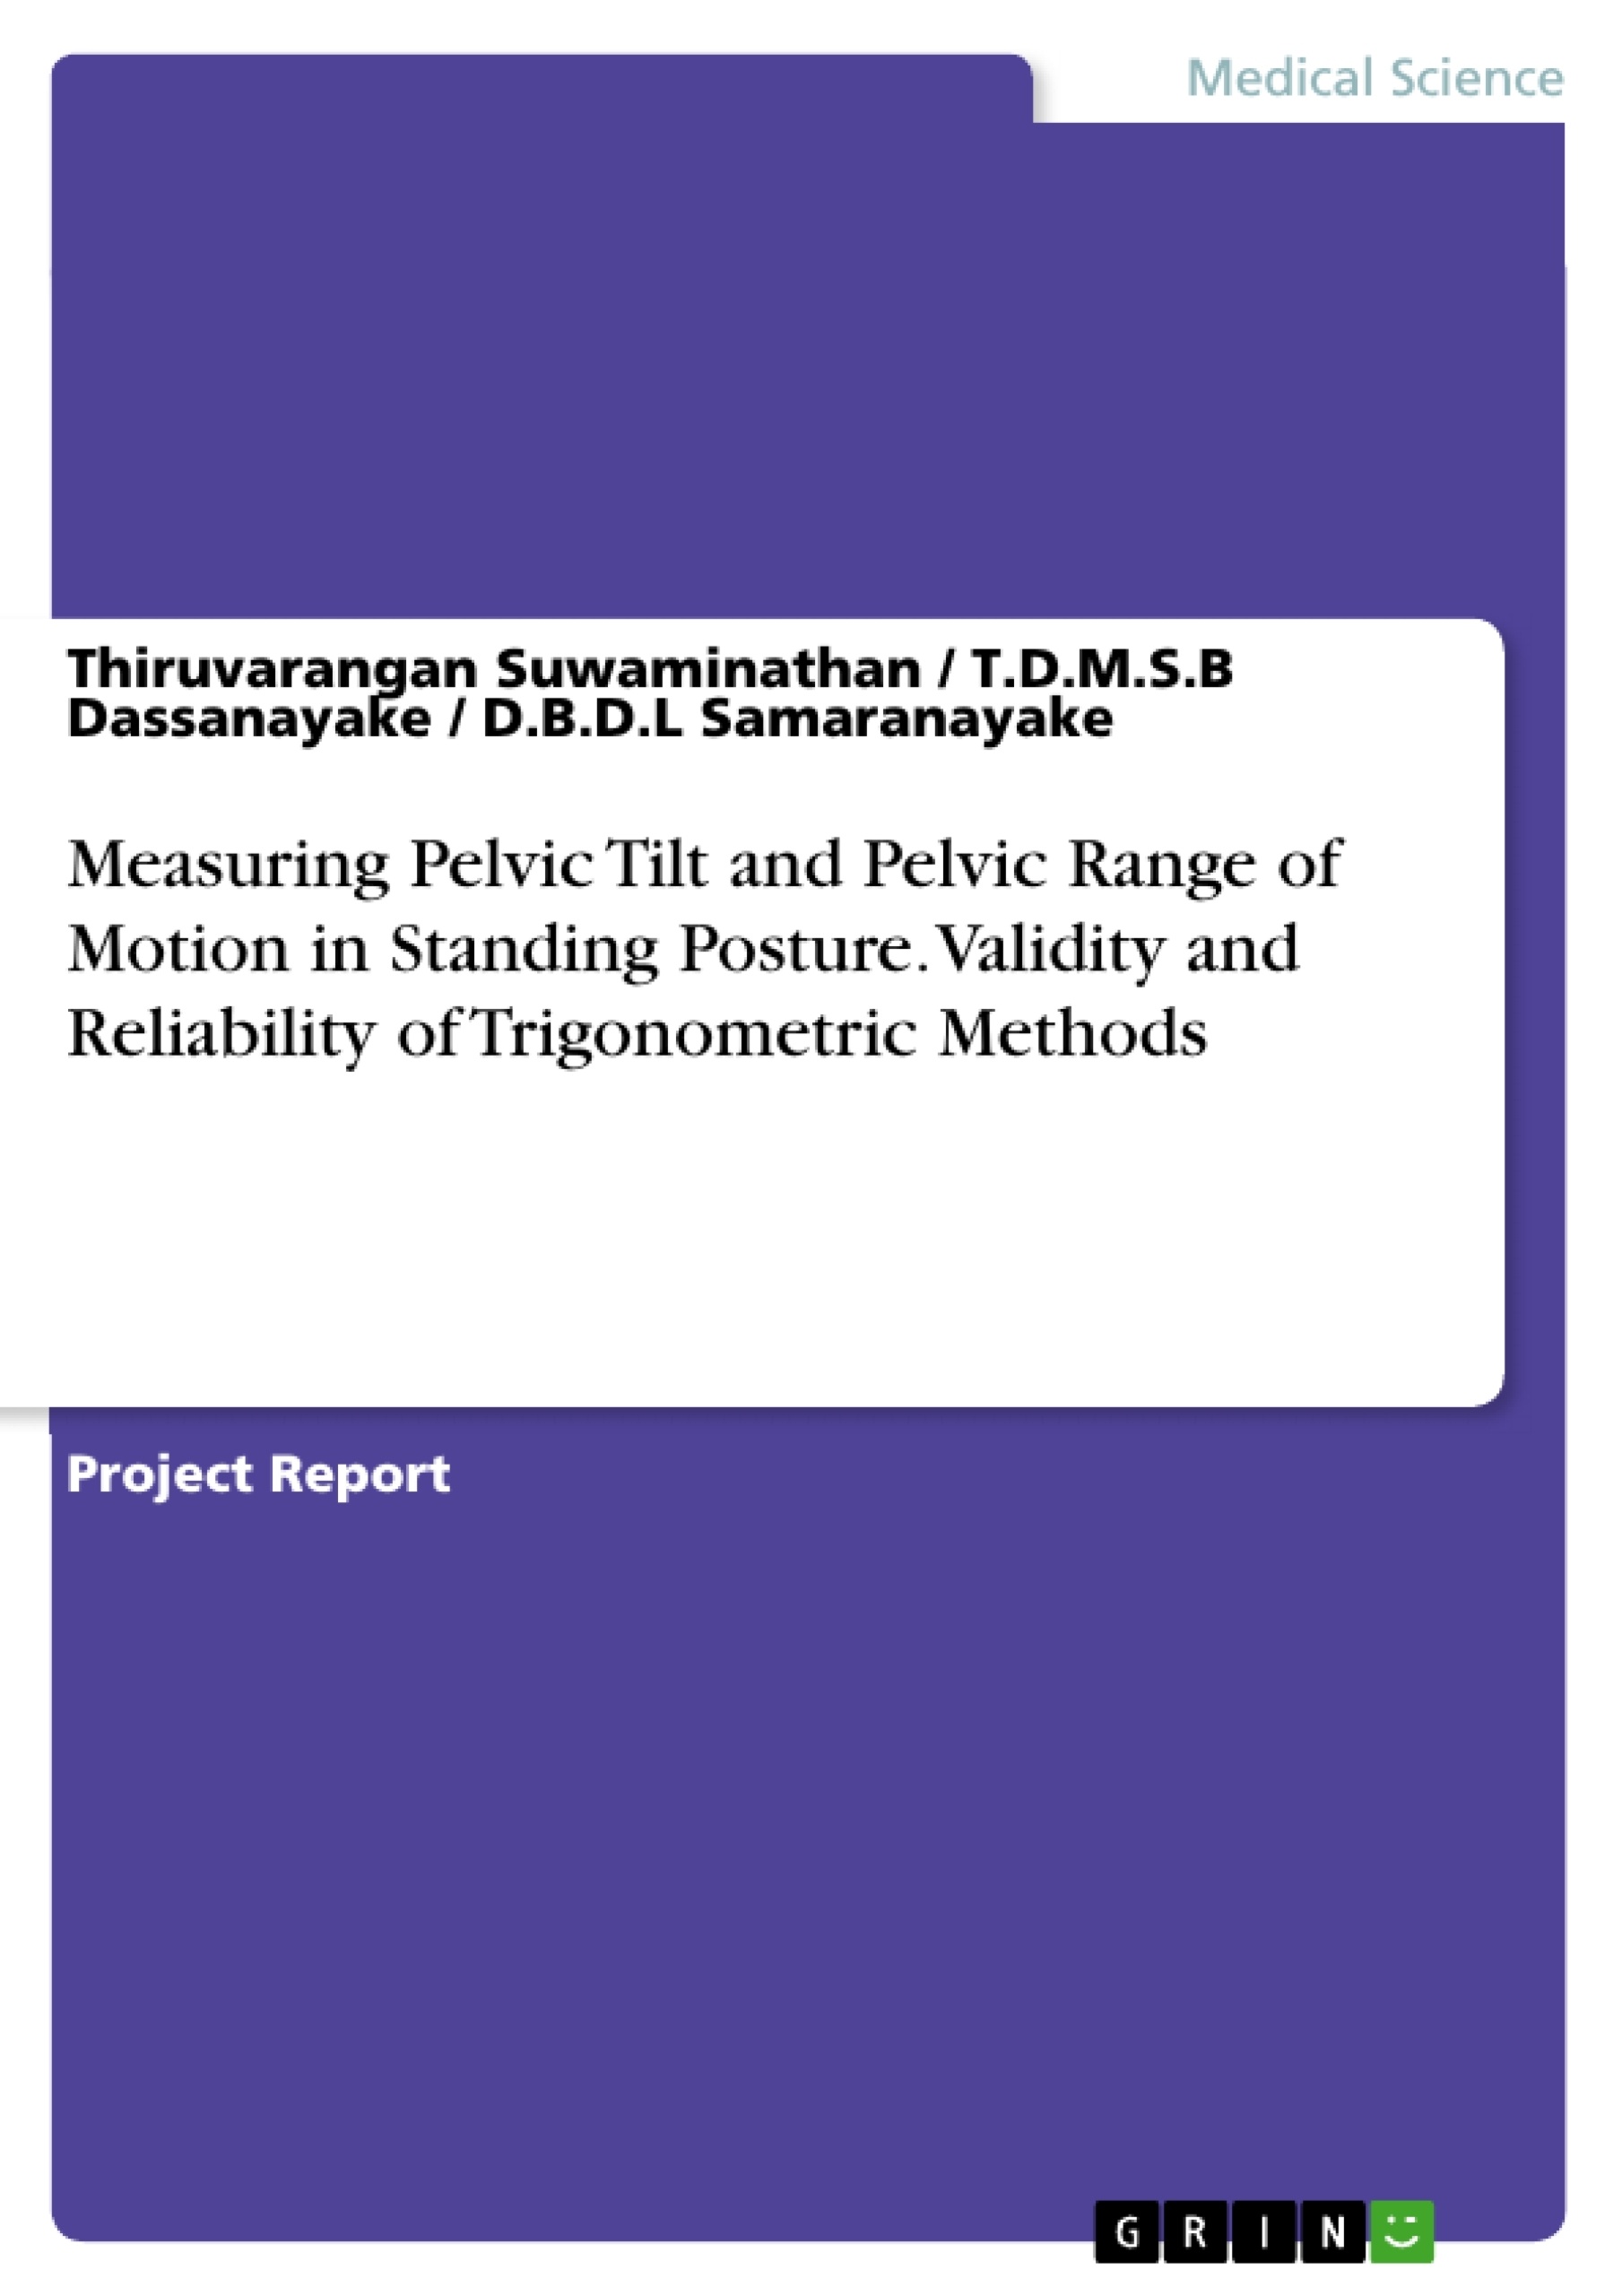 Title: Measuring Pelvic Tilt and Pelvic Range of Motion in Standing Posture. Validity and Reliability of Trigonometric Methods